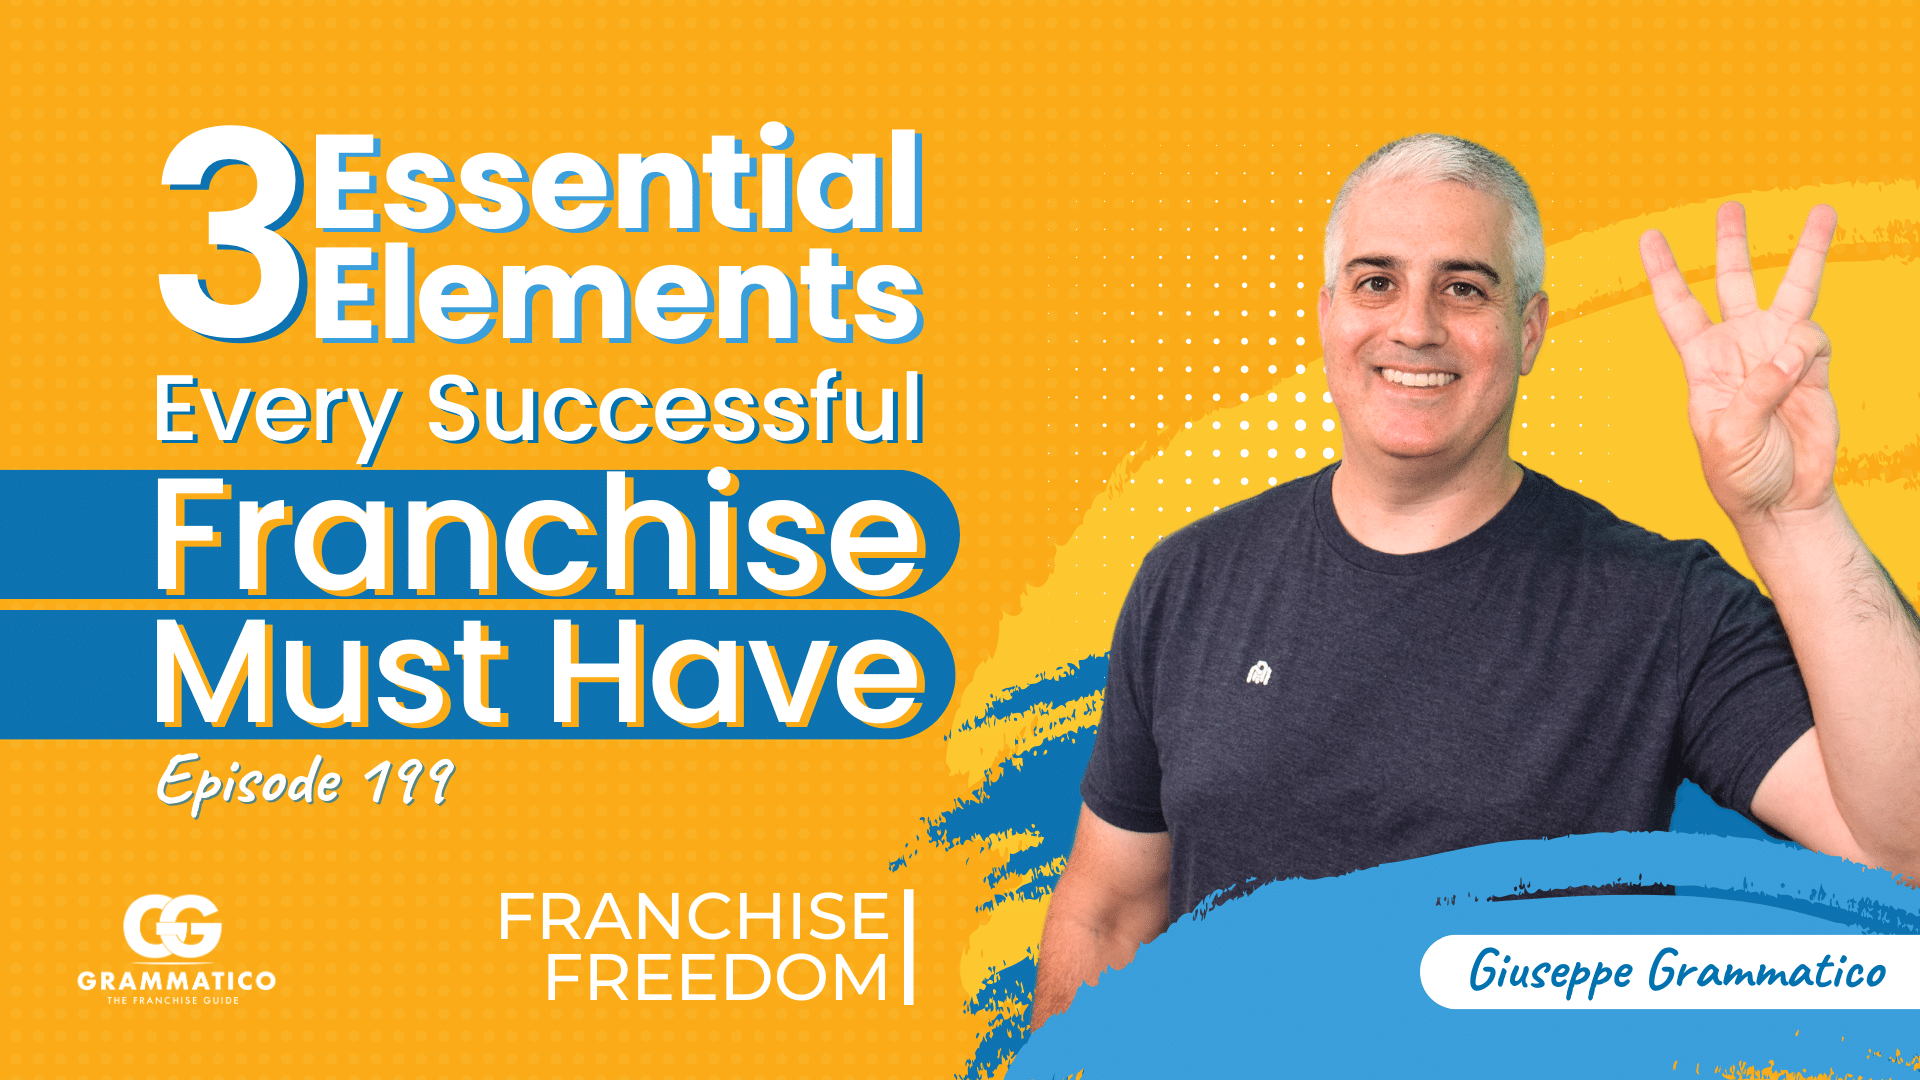 3 Essential Elements Every Successful Franchise Must Have